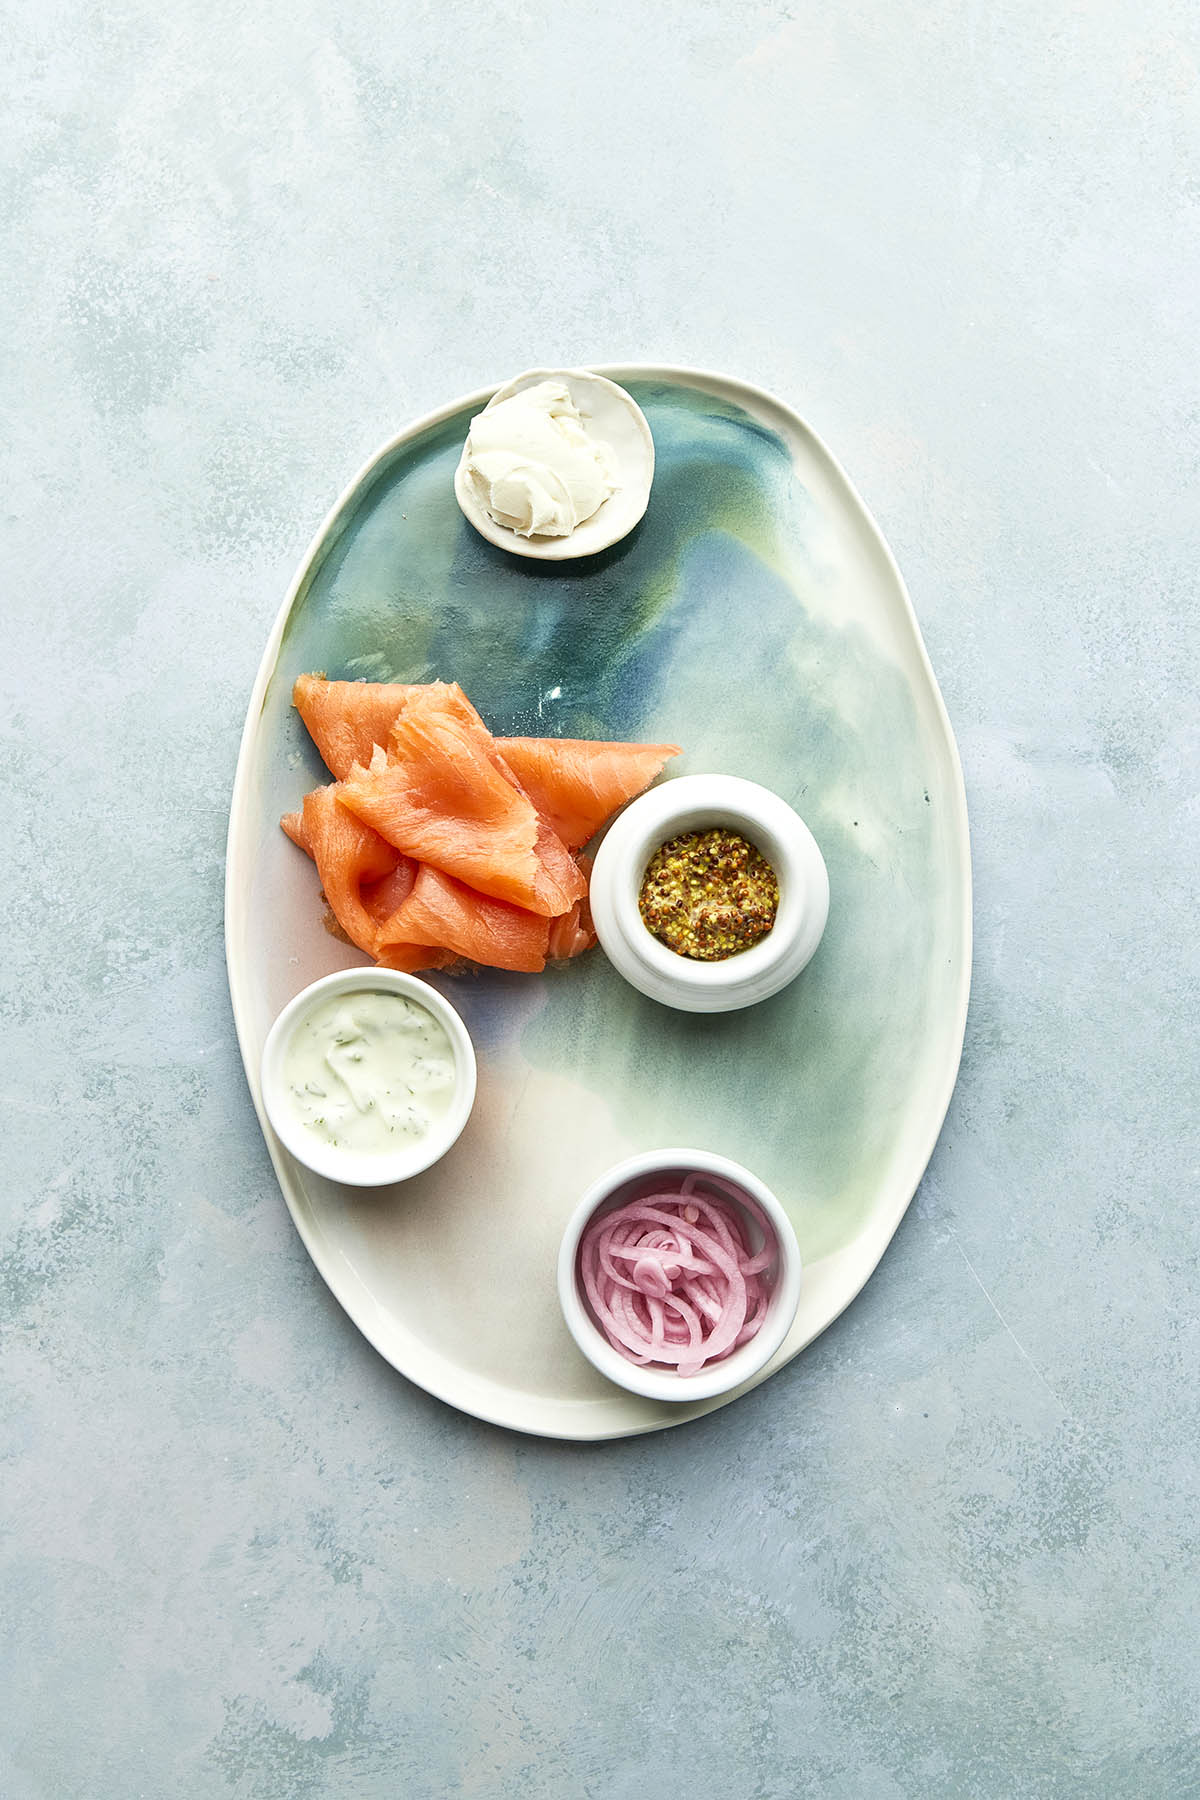 The second step of this smoked salmon platter tutorial.